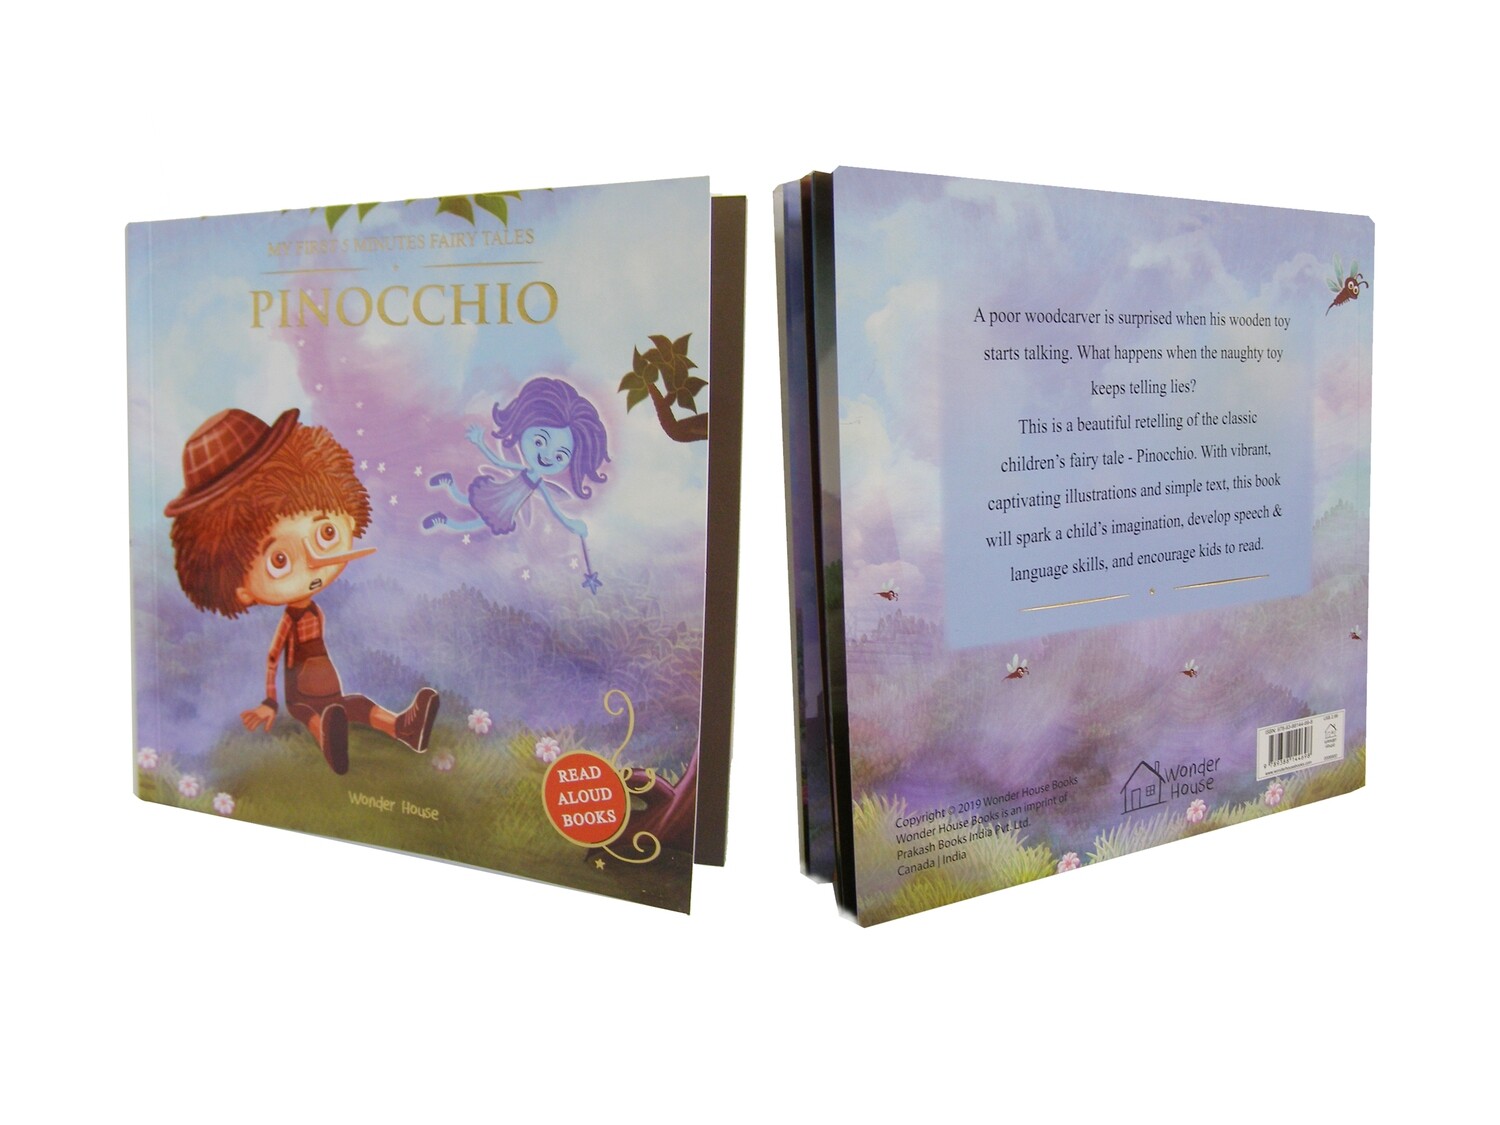 PINOCCHIO - MY FIRST 5 MINUTES FAIRY TALES BOOK